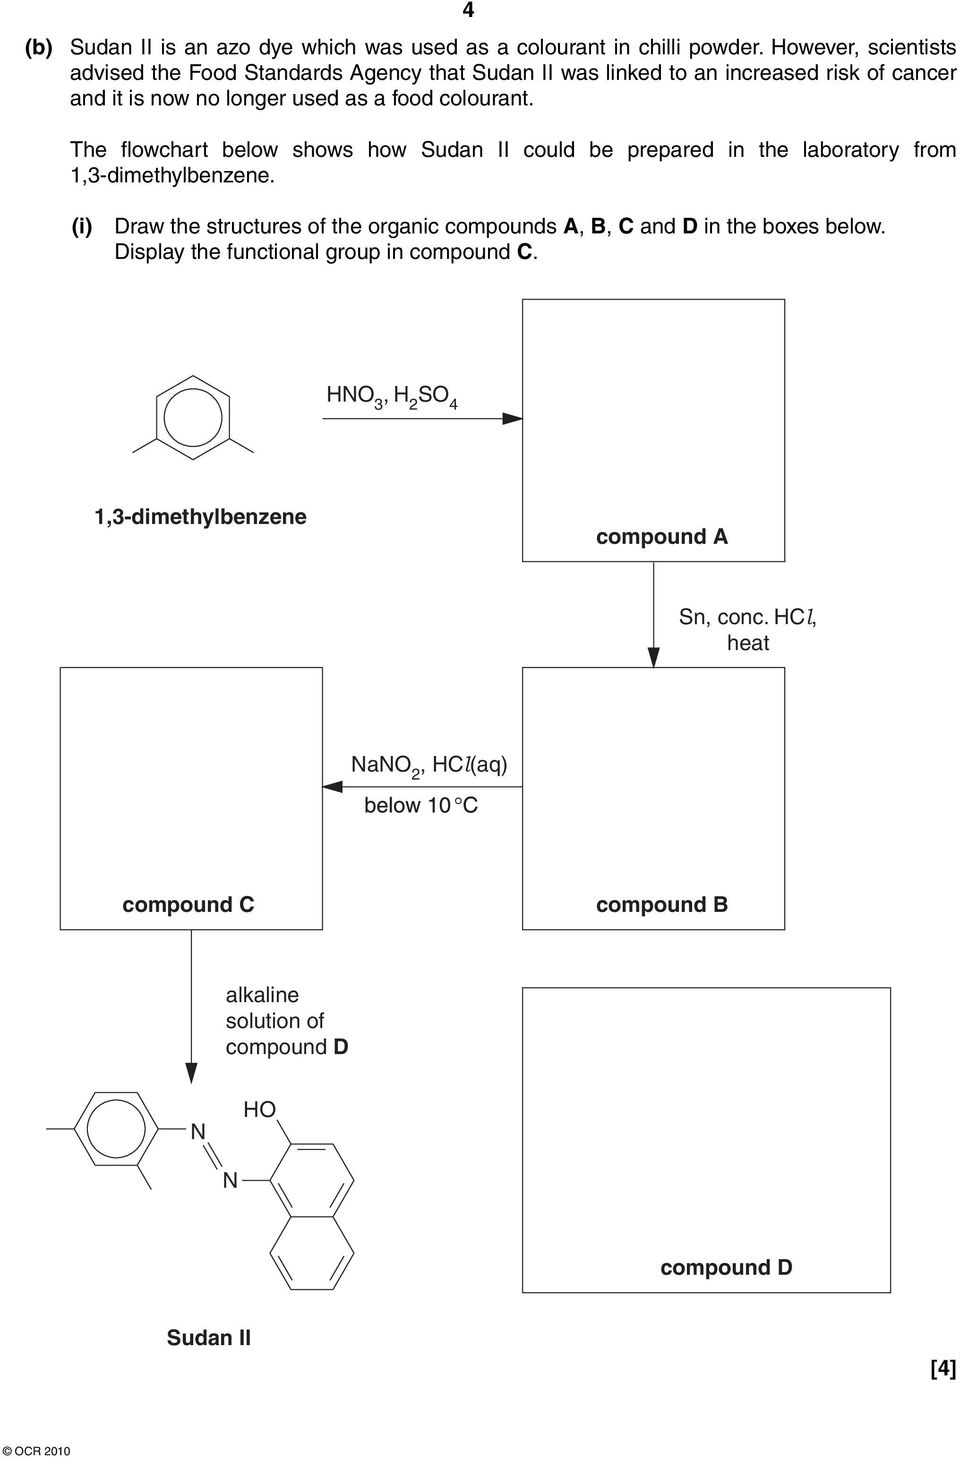 colourant. The flowchart below shows how Sudan II could be prepared in the laboratory from 1,3-dimethylbenzene.